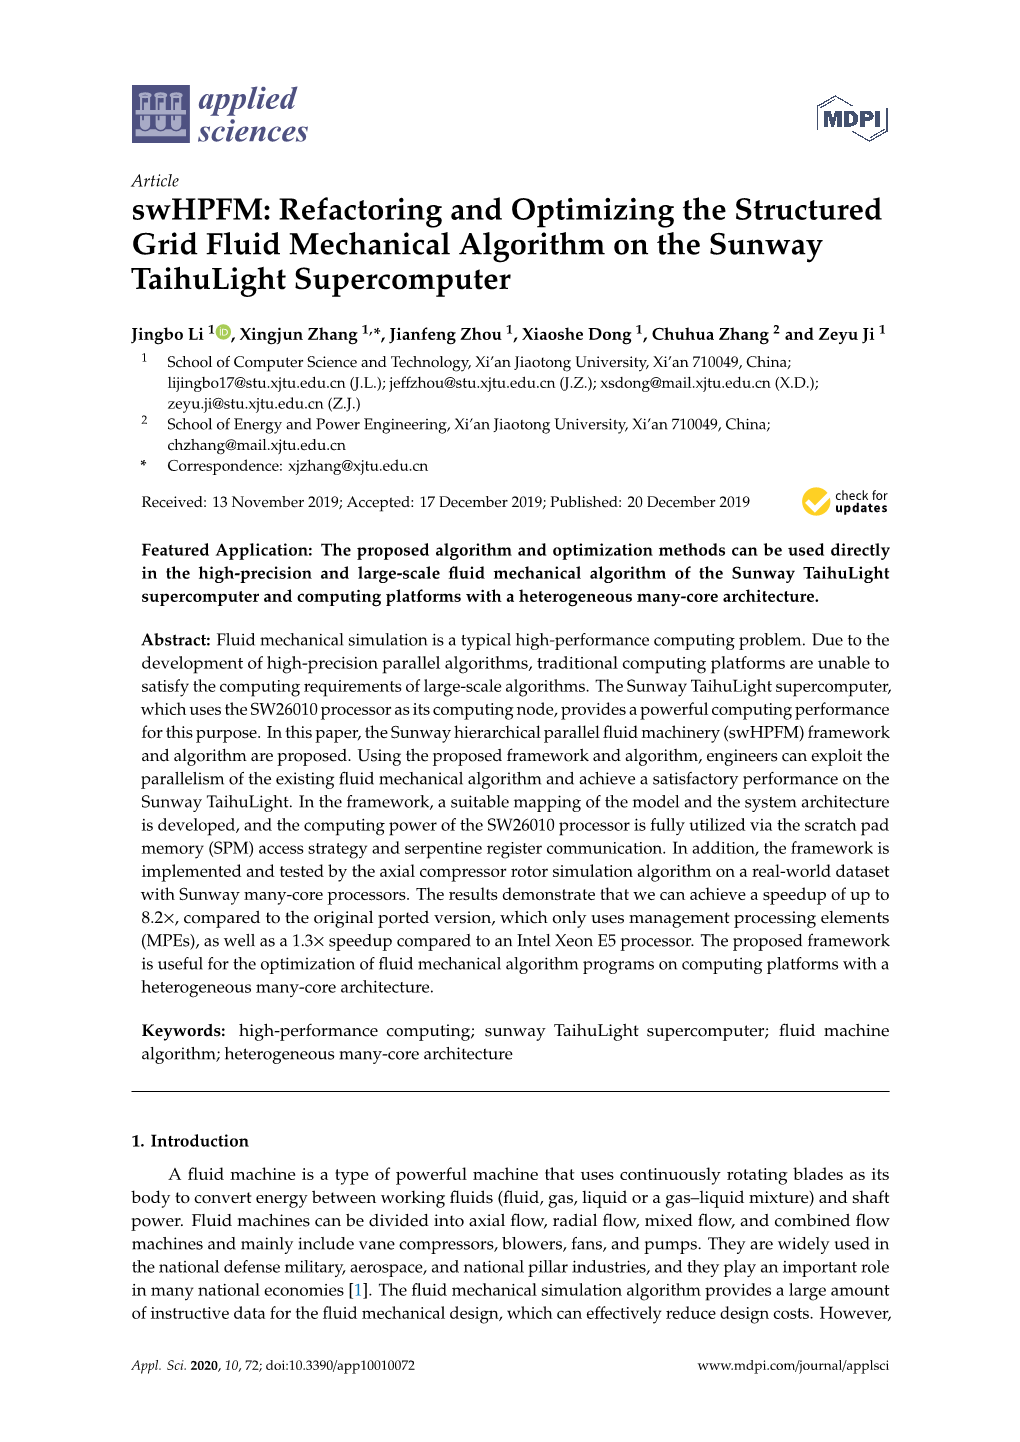 Refactoring and Optimizing the Structured Grid Fluid Mechanical Algorithm on the Sunway Taihulight Supercomputer